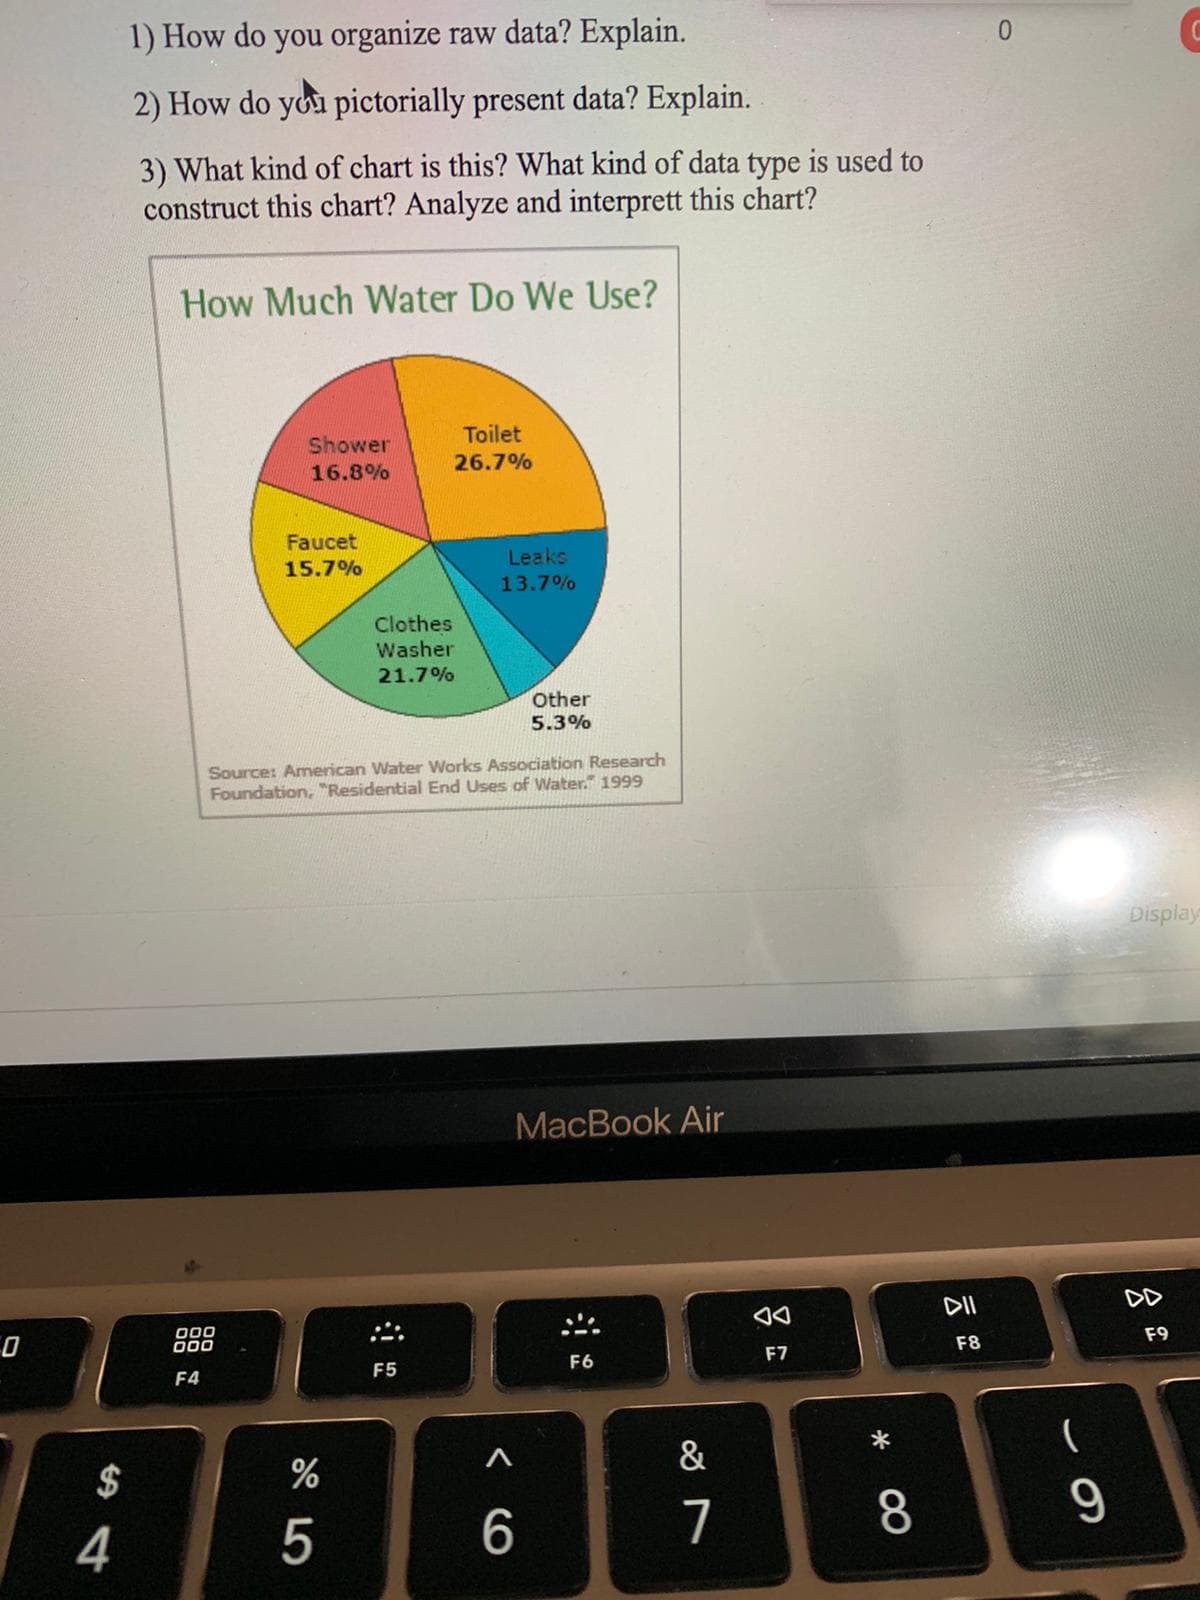 1) How do you organize raw data? Explain.
0.
2) How do you pictorially present data? Explain.
3) What kind of chart is this? What kind of data type is used to
construct this chart? Analyze and interprett this chart?
How Much Water Do We Use?
Shower
Toilet
16.8%
26.7%
Faucet
15.7%
Leaks
13.7%
Clothes
Washer
21.7%
Other
5.3%
Source: American Water Works Association Research
Foundation, "Residential End Uses of Water." 1999
Display
MacBook Air
DII
DD
000
000
F8
F9
F5
F6
F7
F4
&
一
$
4
5
7
8
< CO
